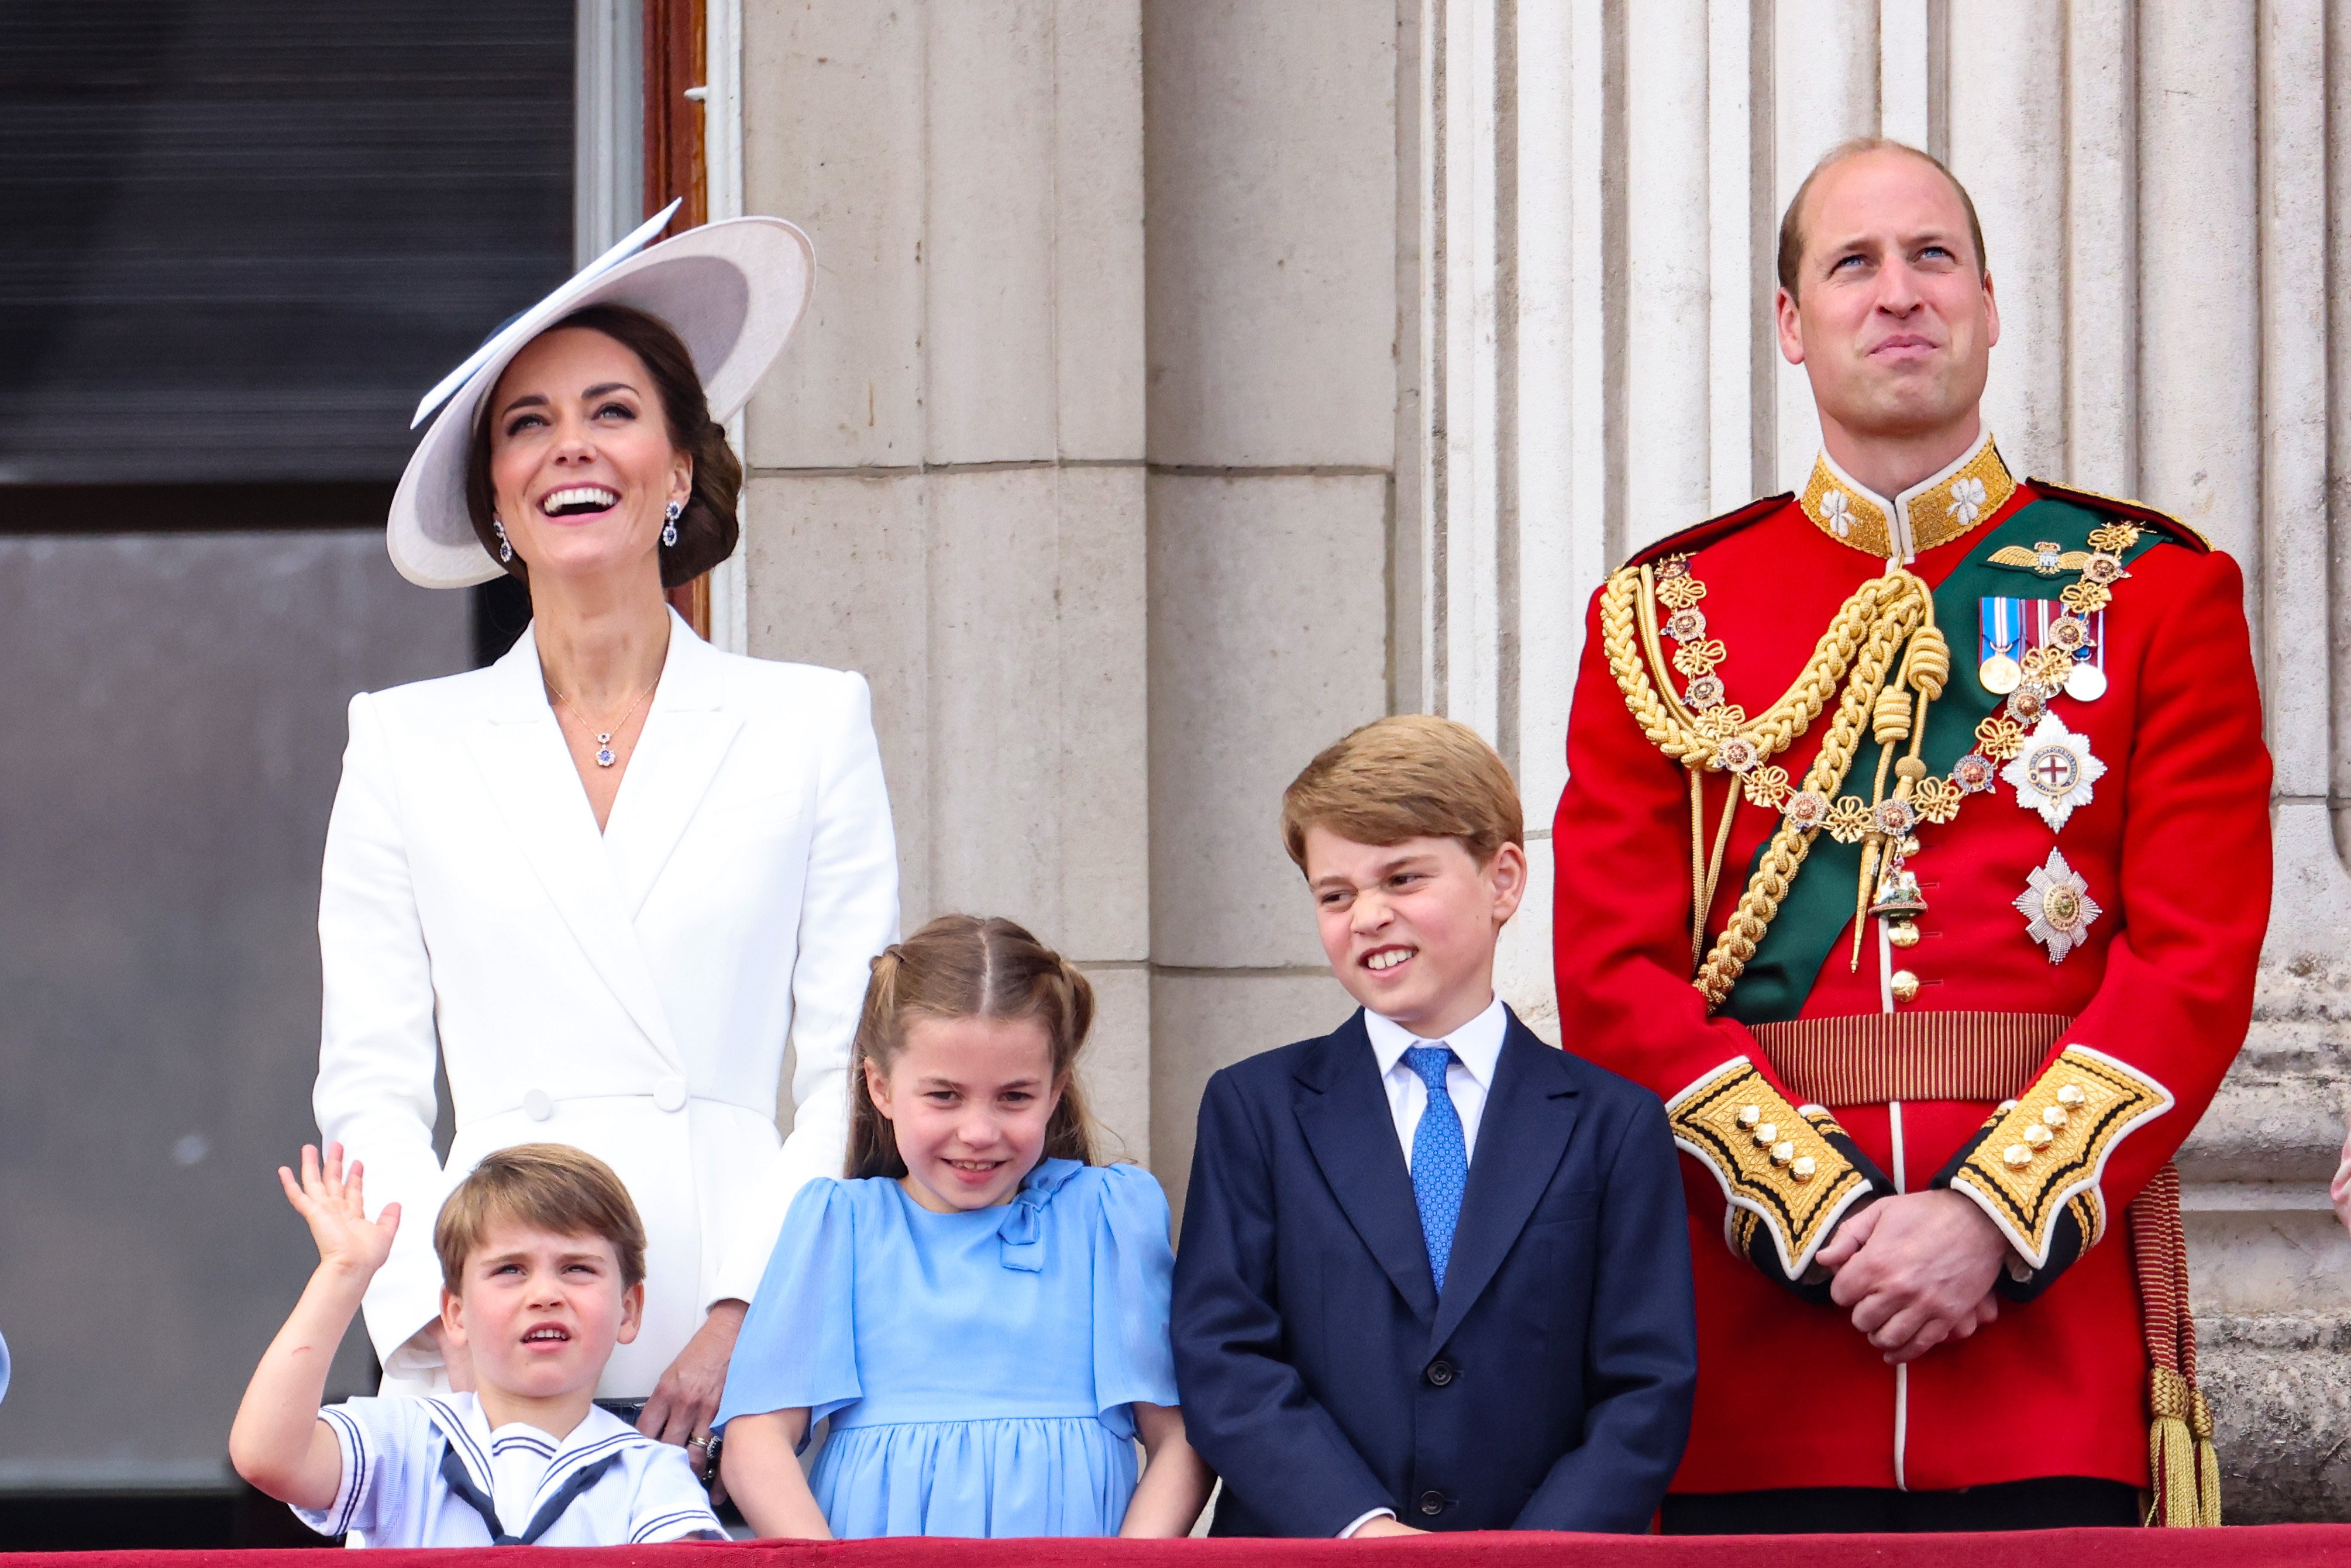 Prince George Prince William, Princess Charlotte, Prince Louis and Catherine, stand on the balcony during the Trooping the Color parade on June 2, 2022 in London, England. | Source: Getty Images